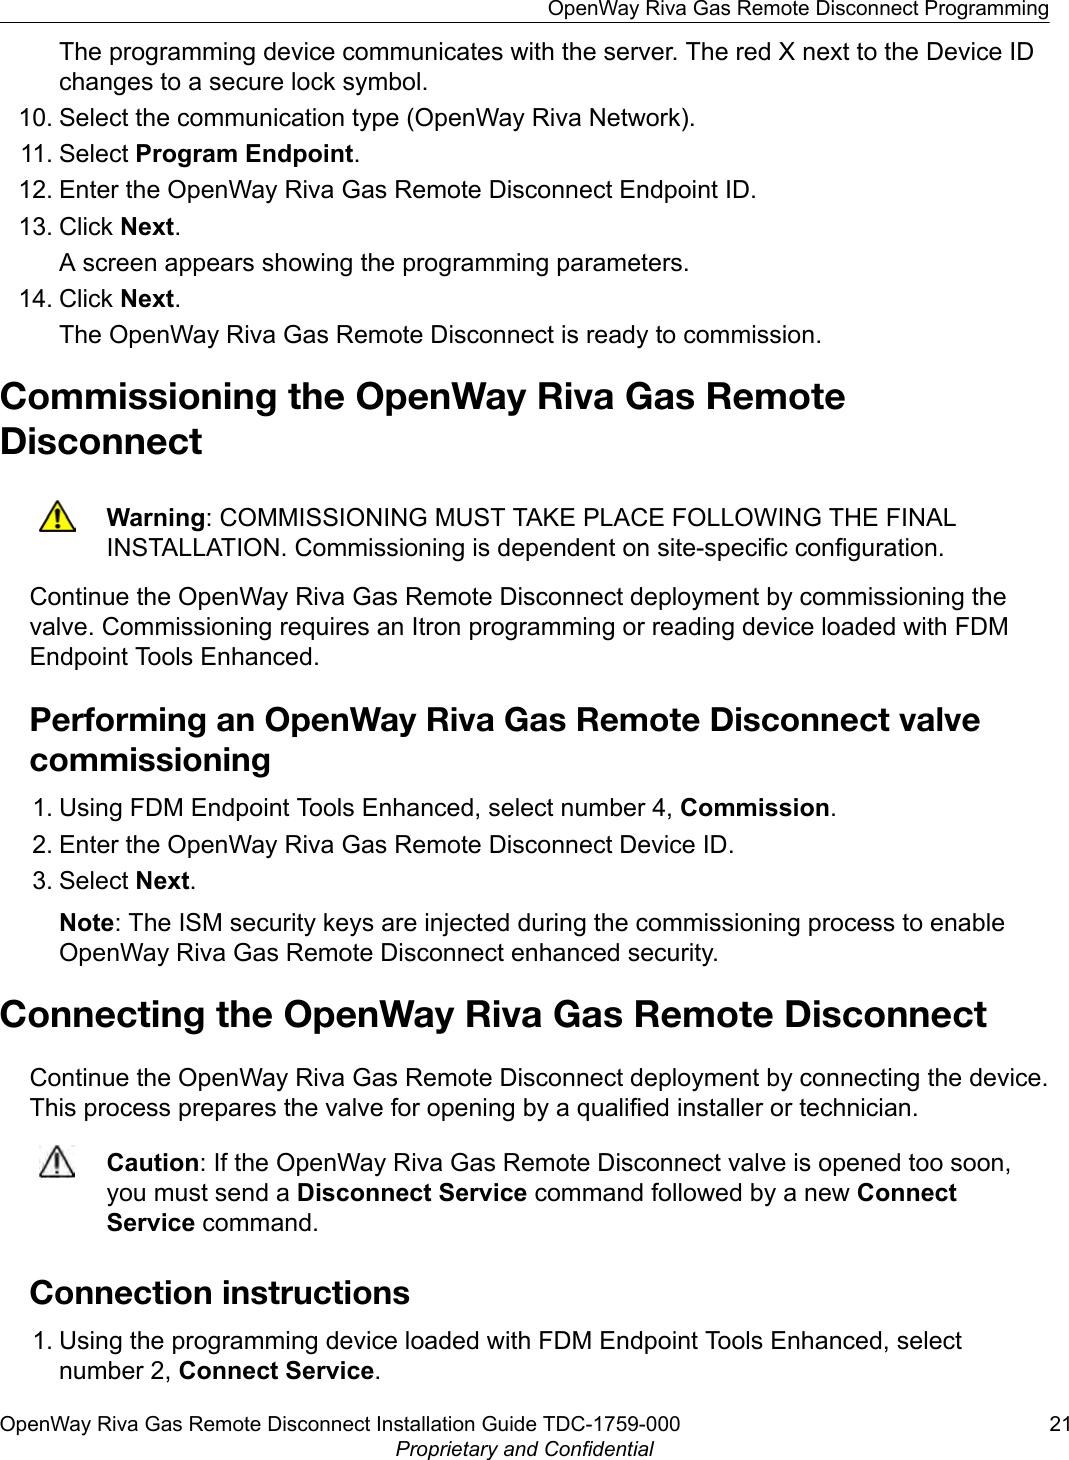 The programming device communicates with the server. The red X next to the Device IDchanges to a secure lock symbol.10. Select the communication type (OpenWay Riva Network).11. Select Program Endpoint.12. Enter the OpenWay Riva Gas Remote Disconnect Endpoint ID.13. Click Next.A screen appears showing the programming parameters.14. Click Next.The OpenWay Riva Gas Remote Disconnect is ready to commission.Commissioning the OpenWay Riva Gas RemoteDisconnectWarning: COMMISSIONING MUST TAKE PLACE FOLLOWING THE FINALINSTALLATION. Commissioning is dependent on site-specific configuration.Continue the OpenWay Riva Gas Remote Disconnect deployment by commissioning thevalve. Commissioning requires an Itron programming or reading device loaded with FDMEndpoint Tools Enhanced.Performing an OpenWay Riva Gas Remote Disconnect valvecommissioning1. Using FDM Endpoint Tools Enhanced, select number 4, Commission.2. Enter the OpenWay Riva Gas Remote Disconnect Device ID.3. Select Next.Note: The ISM security keys are injected during the commissioning process to enableOpenWay Riva Gas Remote Disconnect enhanced security.Connecting the OpenWay Riva Gas Remote DisconnectContinue the OpenWay Riva Gas Remote Disconnect deployment by connecting the device.This process prepares the valve for opening by a qualified installer or technician.Caution: If the OpenWay Riva Gas Remote Disconnect valve is opened too soon,you must send a Disconnect Service command followed by a new ConnectService command.Connection instructions1. Using the programming device loaded with FDM Endpoint Tools Enhanced, selectnumber 2, Connect Service.OpenWay Riva Gas Remote Disconnect ProgrammingOpenWay Riva Gas Remote Disconnect Installation Guide TDC-1759-000 21Proprietary and Confidential